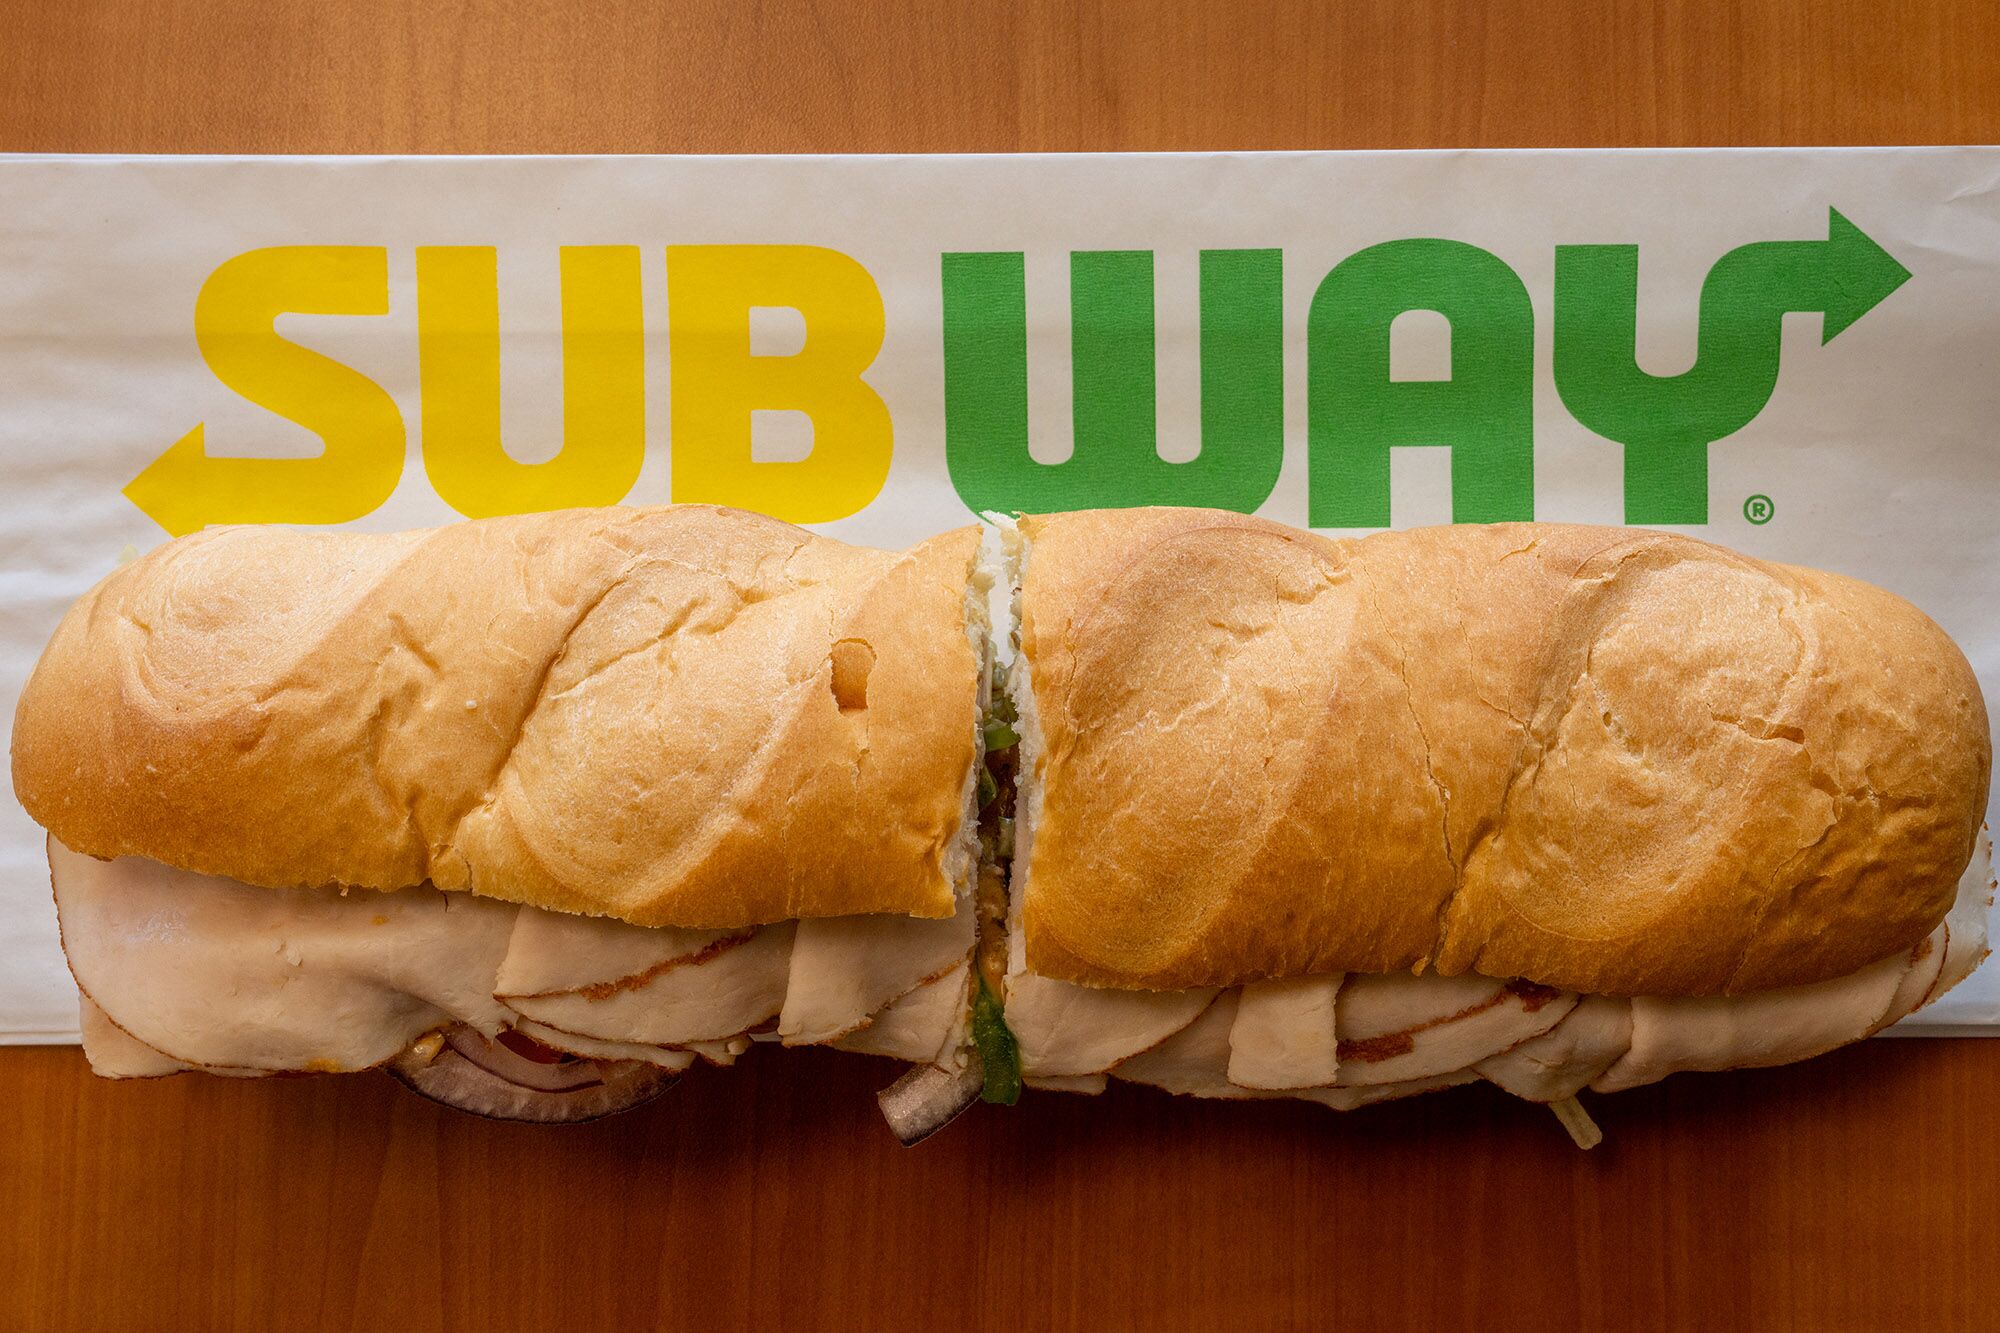 Too many places?  The new owner of the subway has to deal with an amazing…